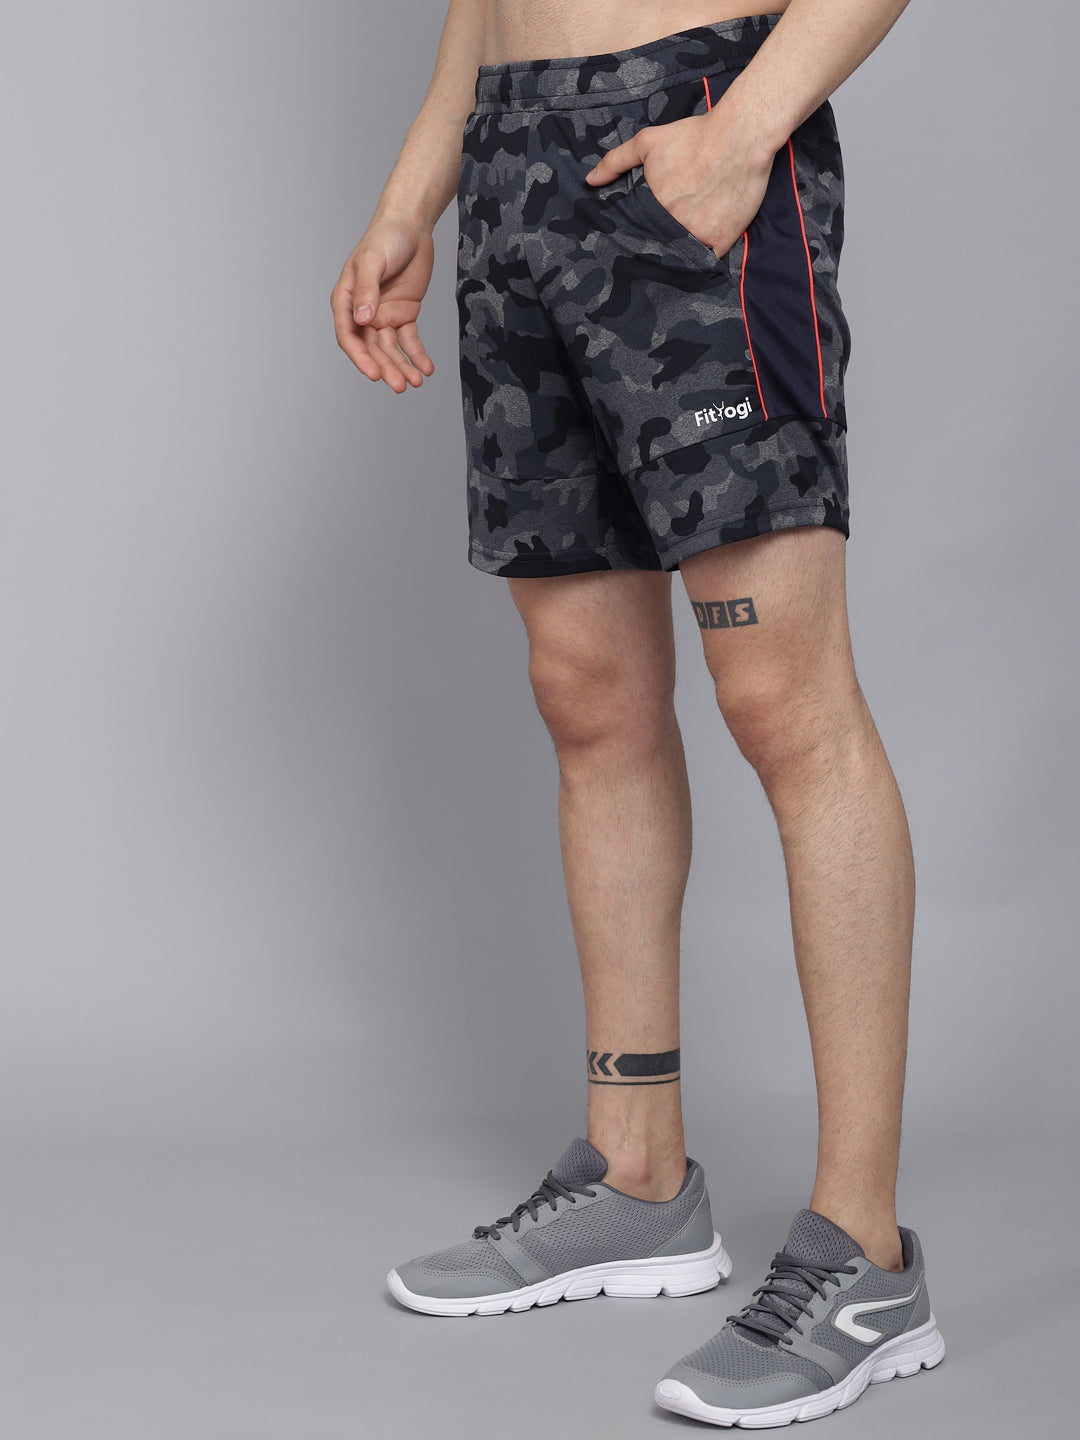 Air Force Camouflage Printed shorts